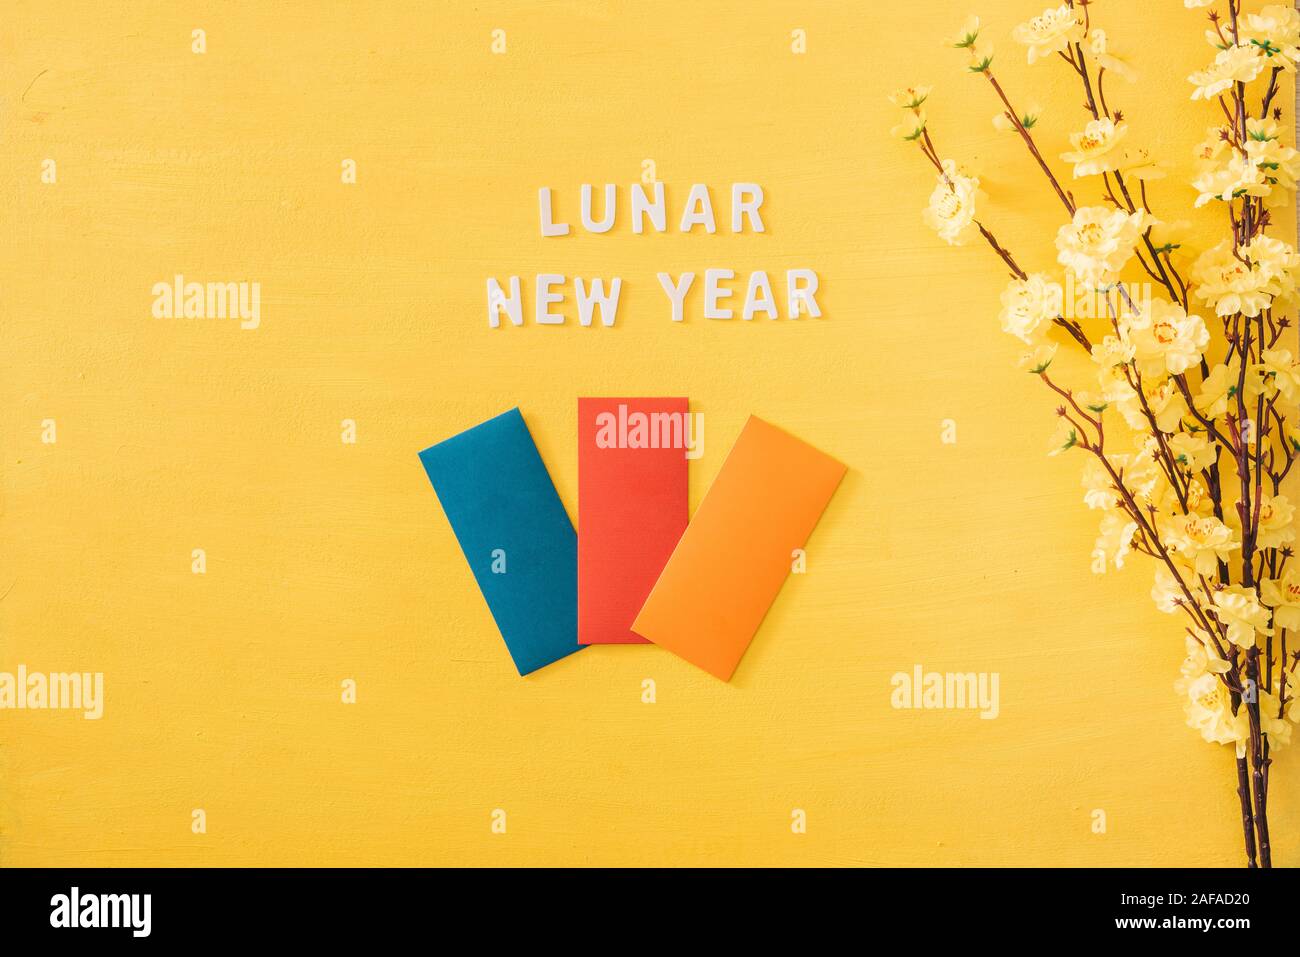 Lunar New Year decoration on a yellow gold background. Tet holiday Stock Photo